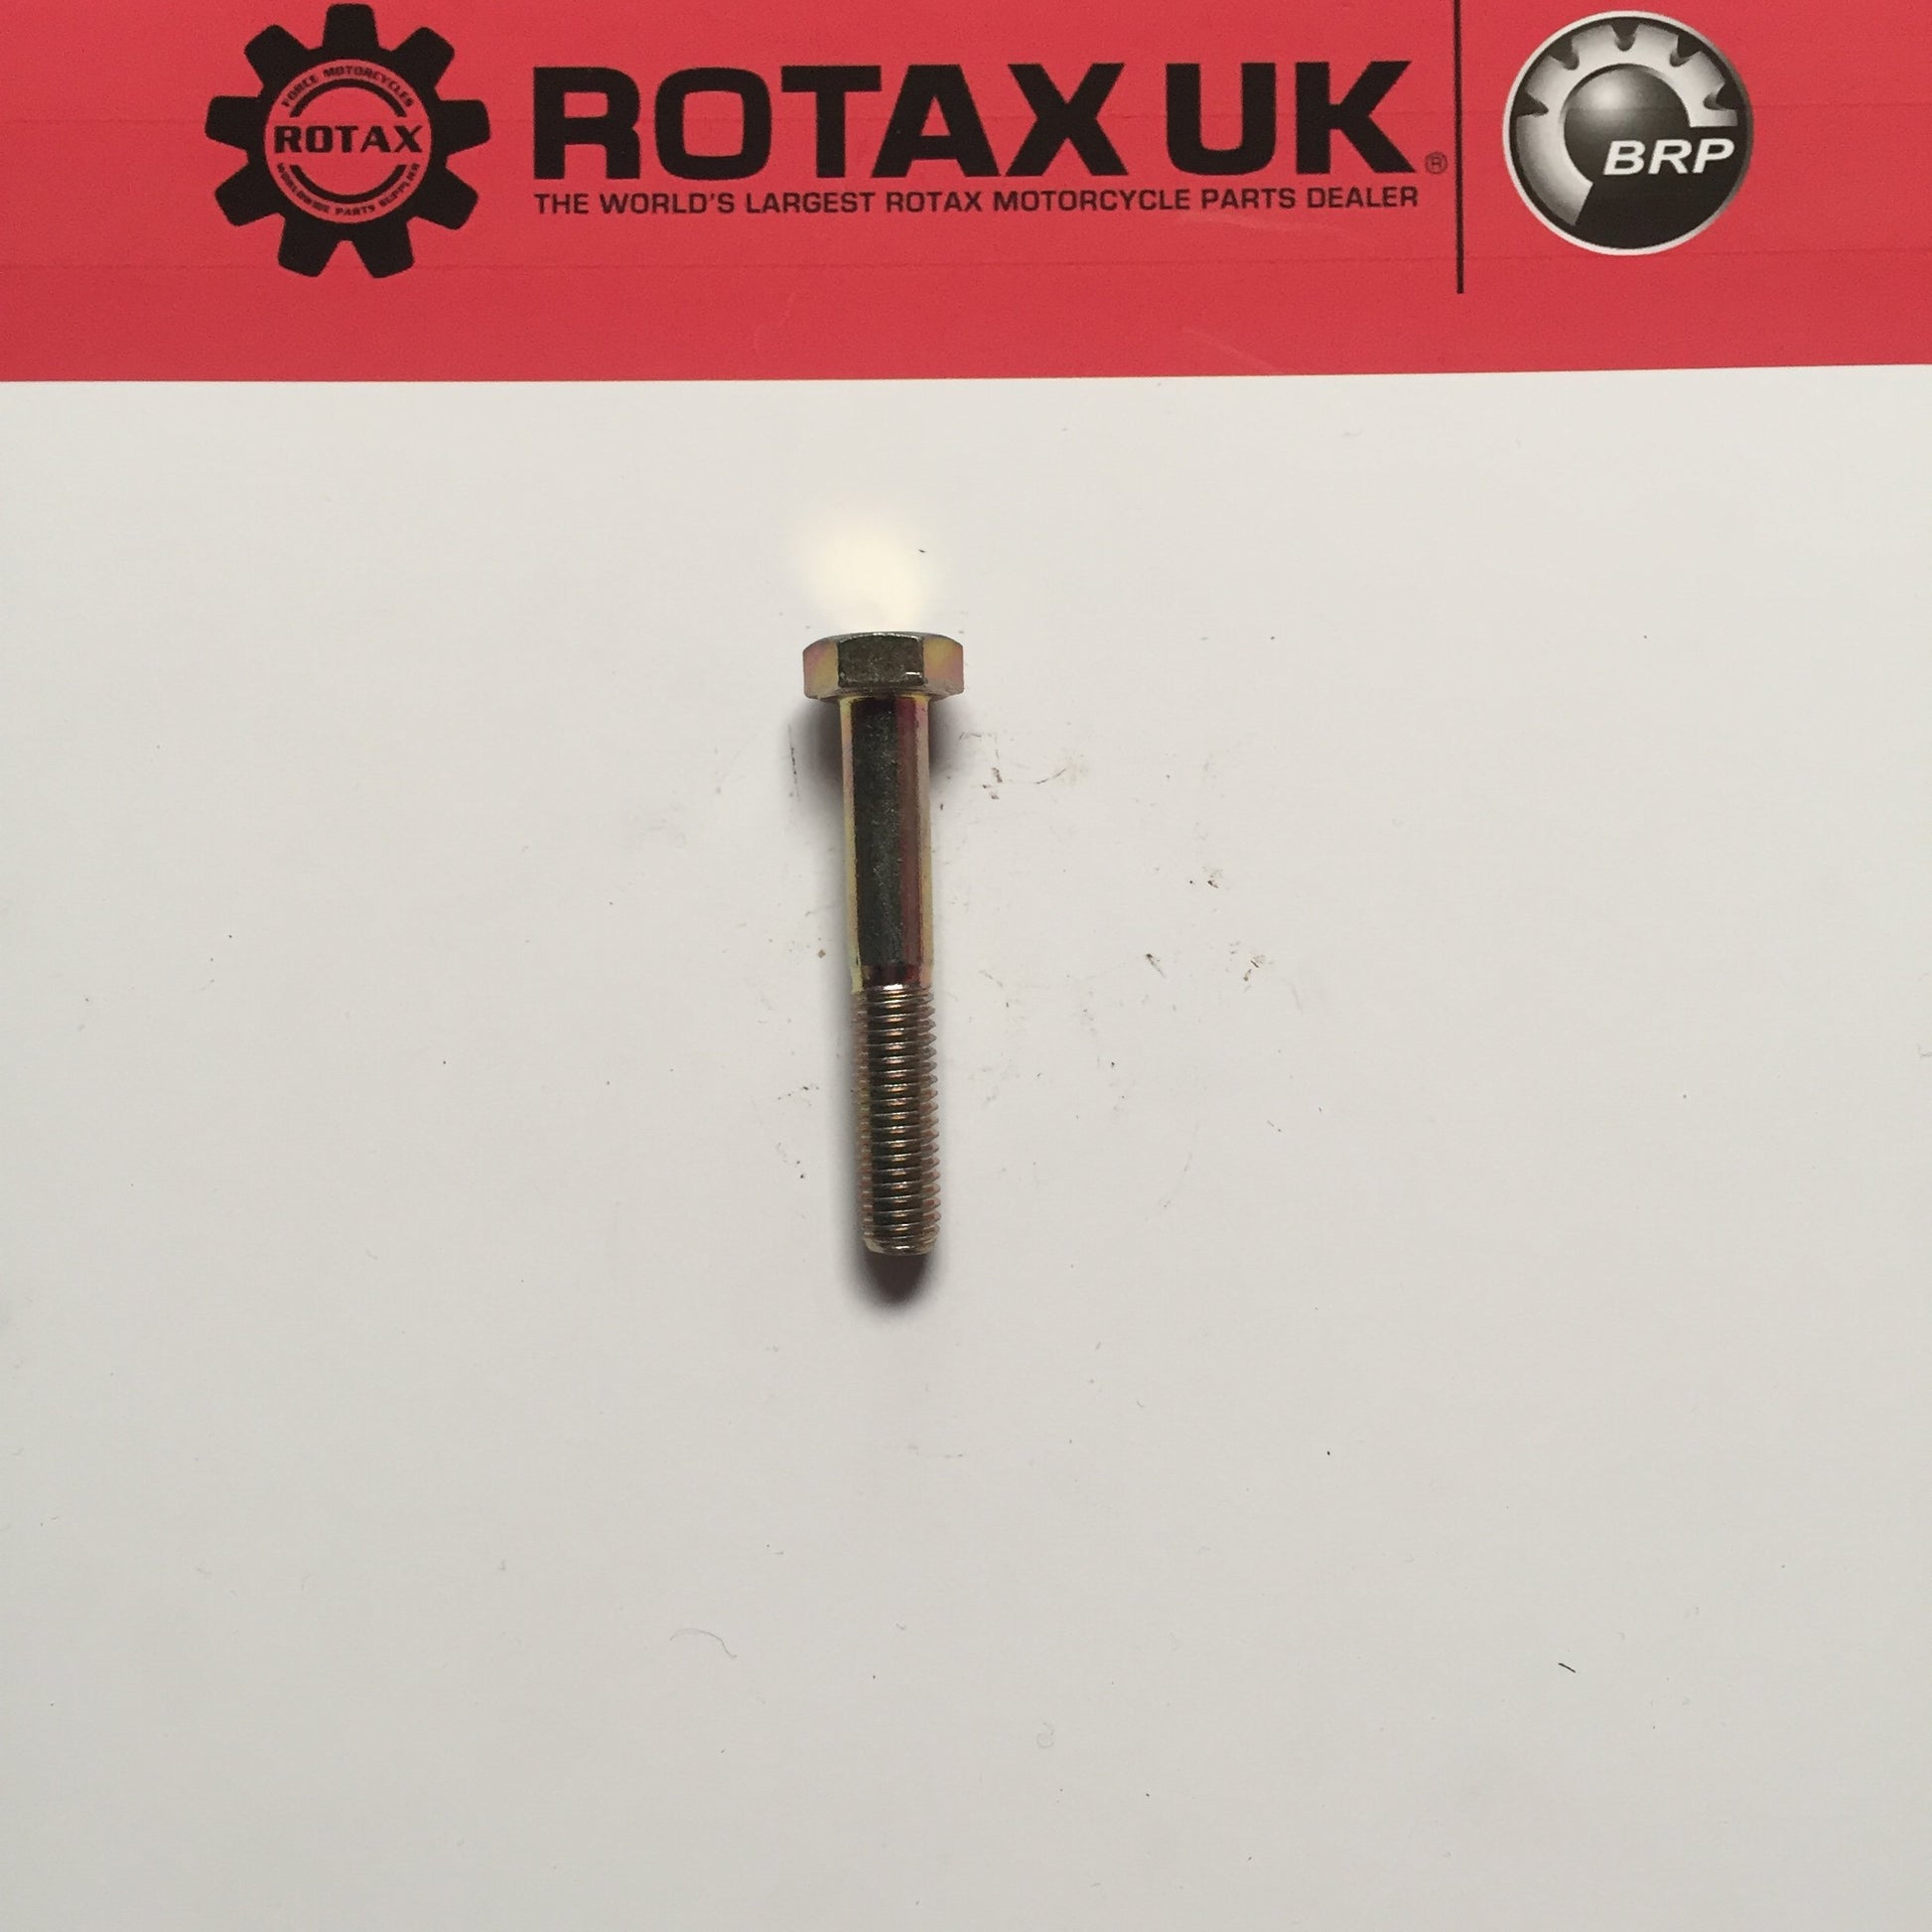 240281 - M8x50mm Hex Screw for engine types: 348, 504, 560, 604, 912, 913, 914.